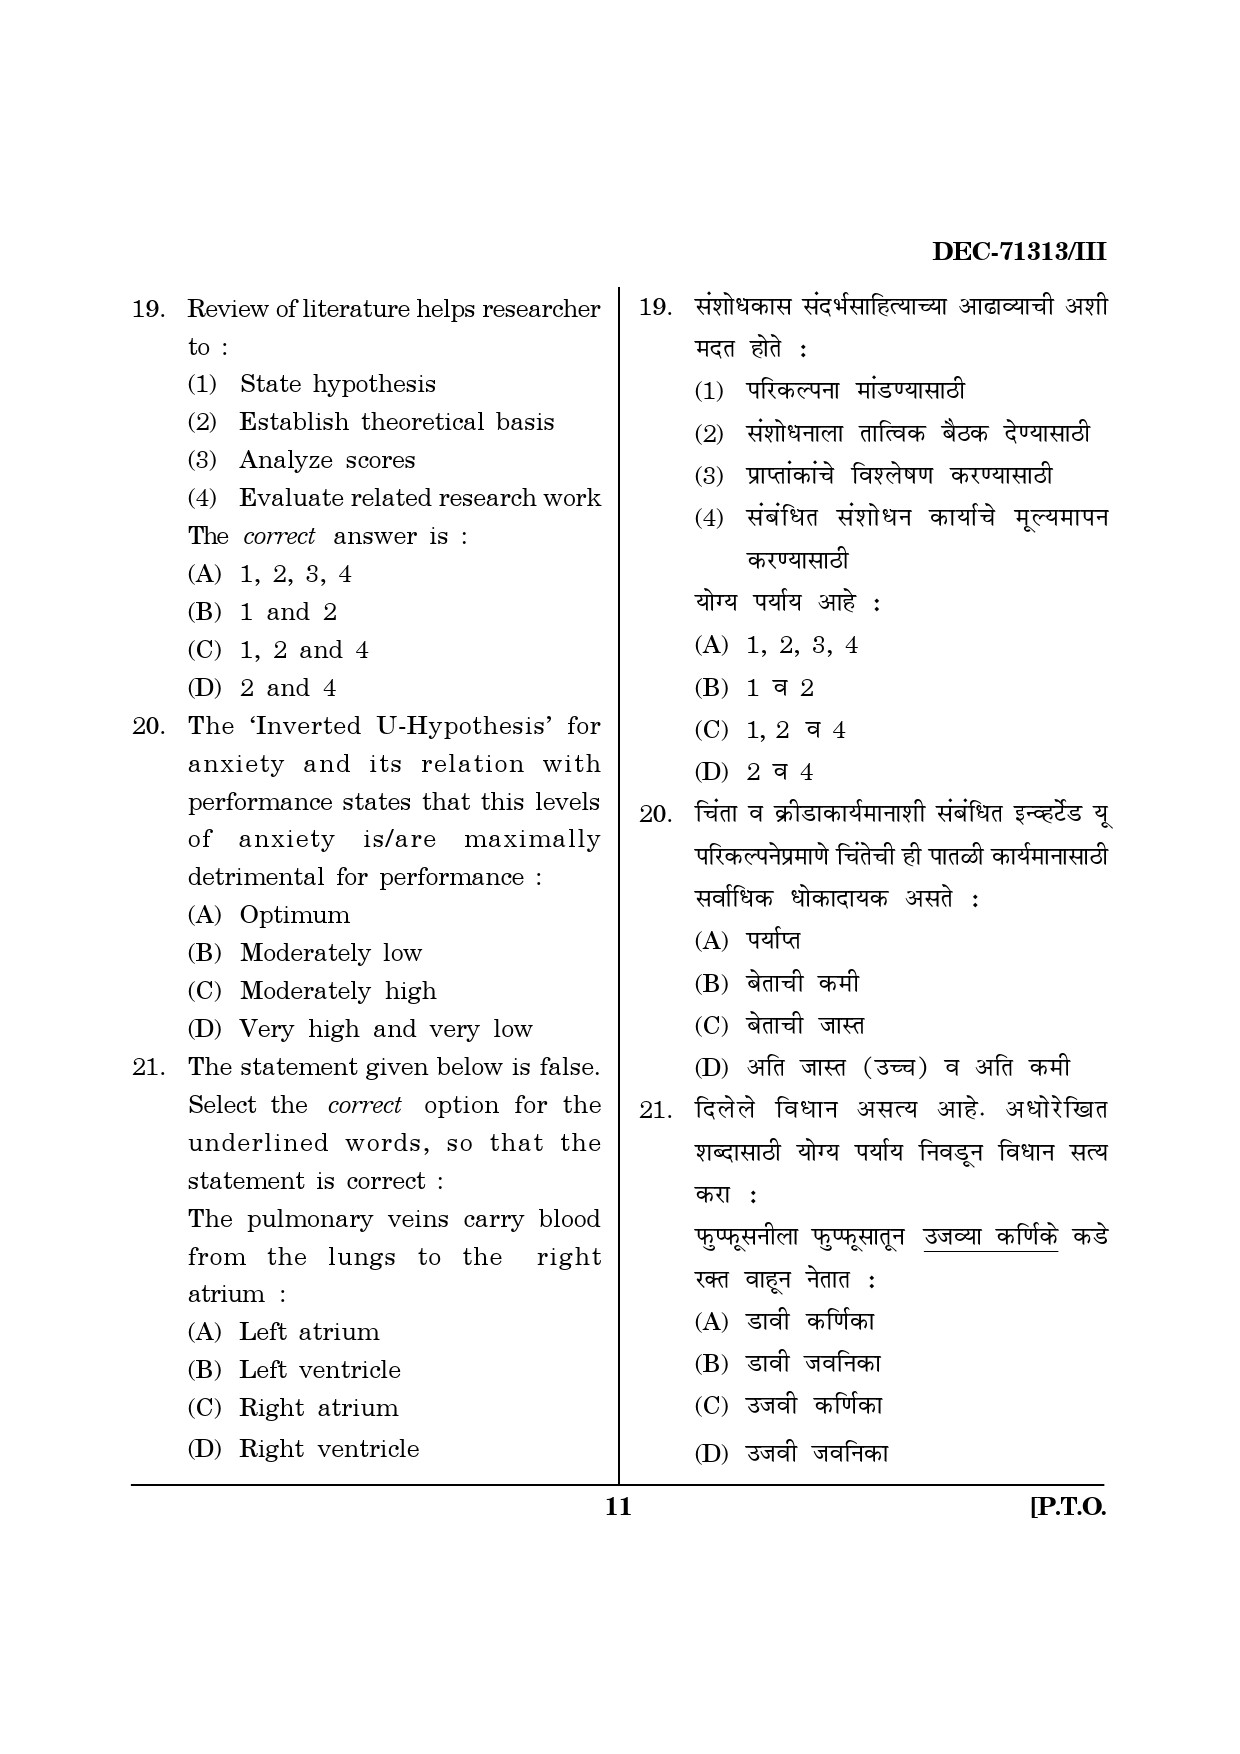 Maharashtra SET Physical Education Question Paper III December 2013 10